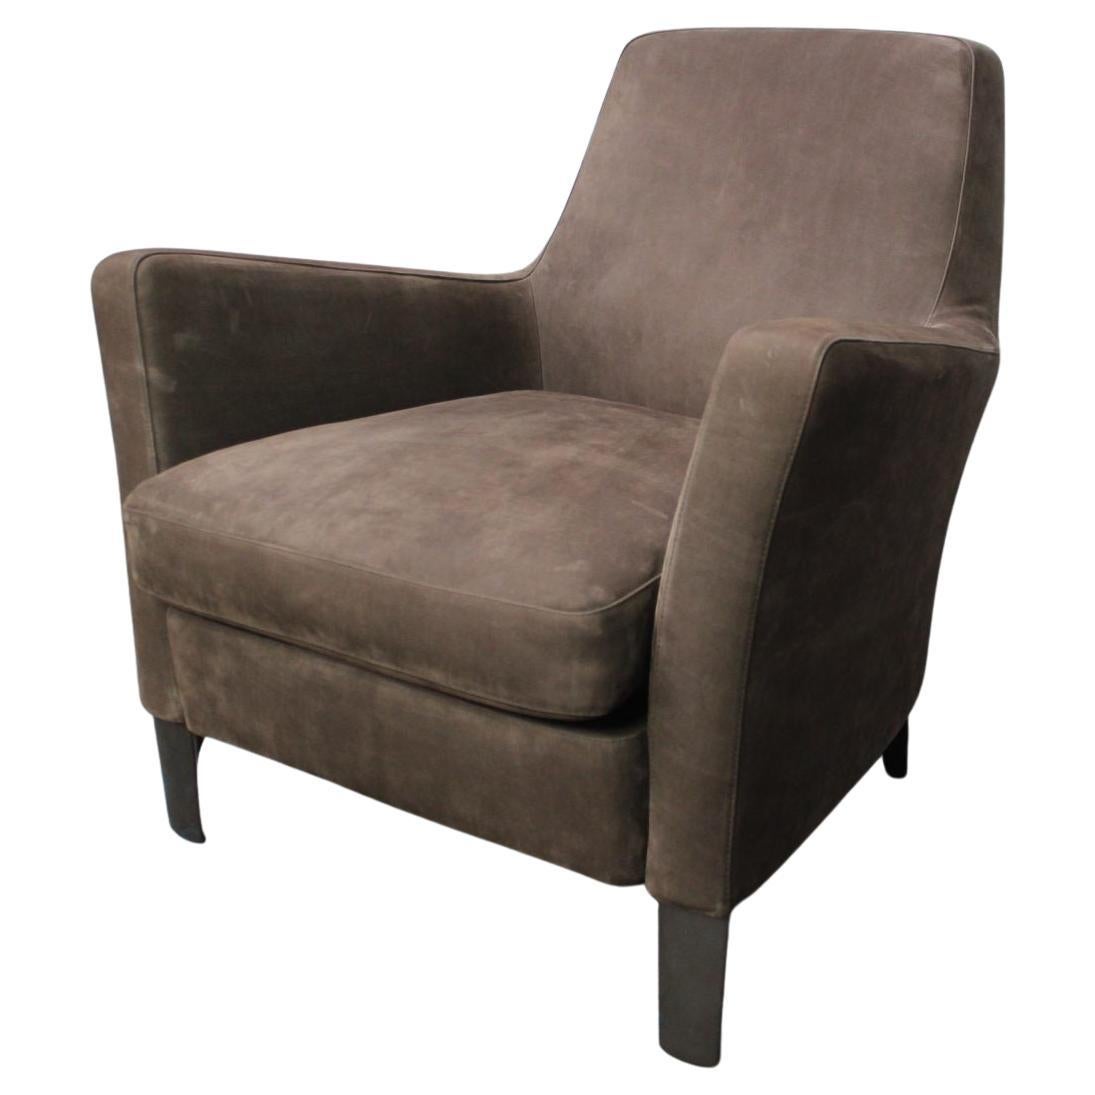 Peerless Pristine Minotti “Denny” Armchair in Suede Leather